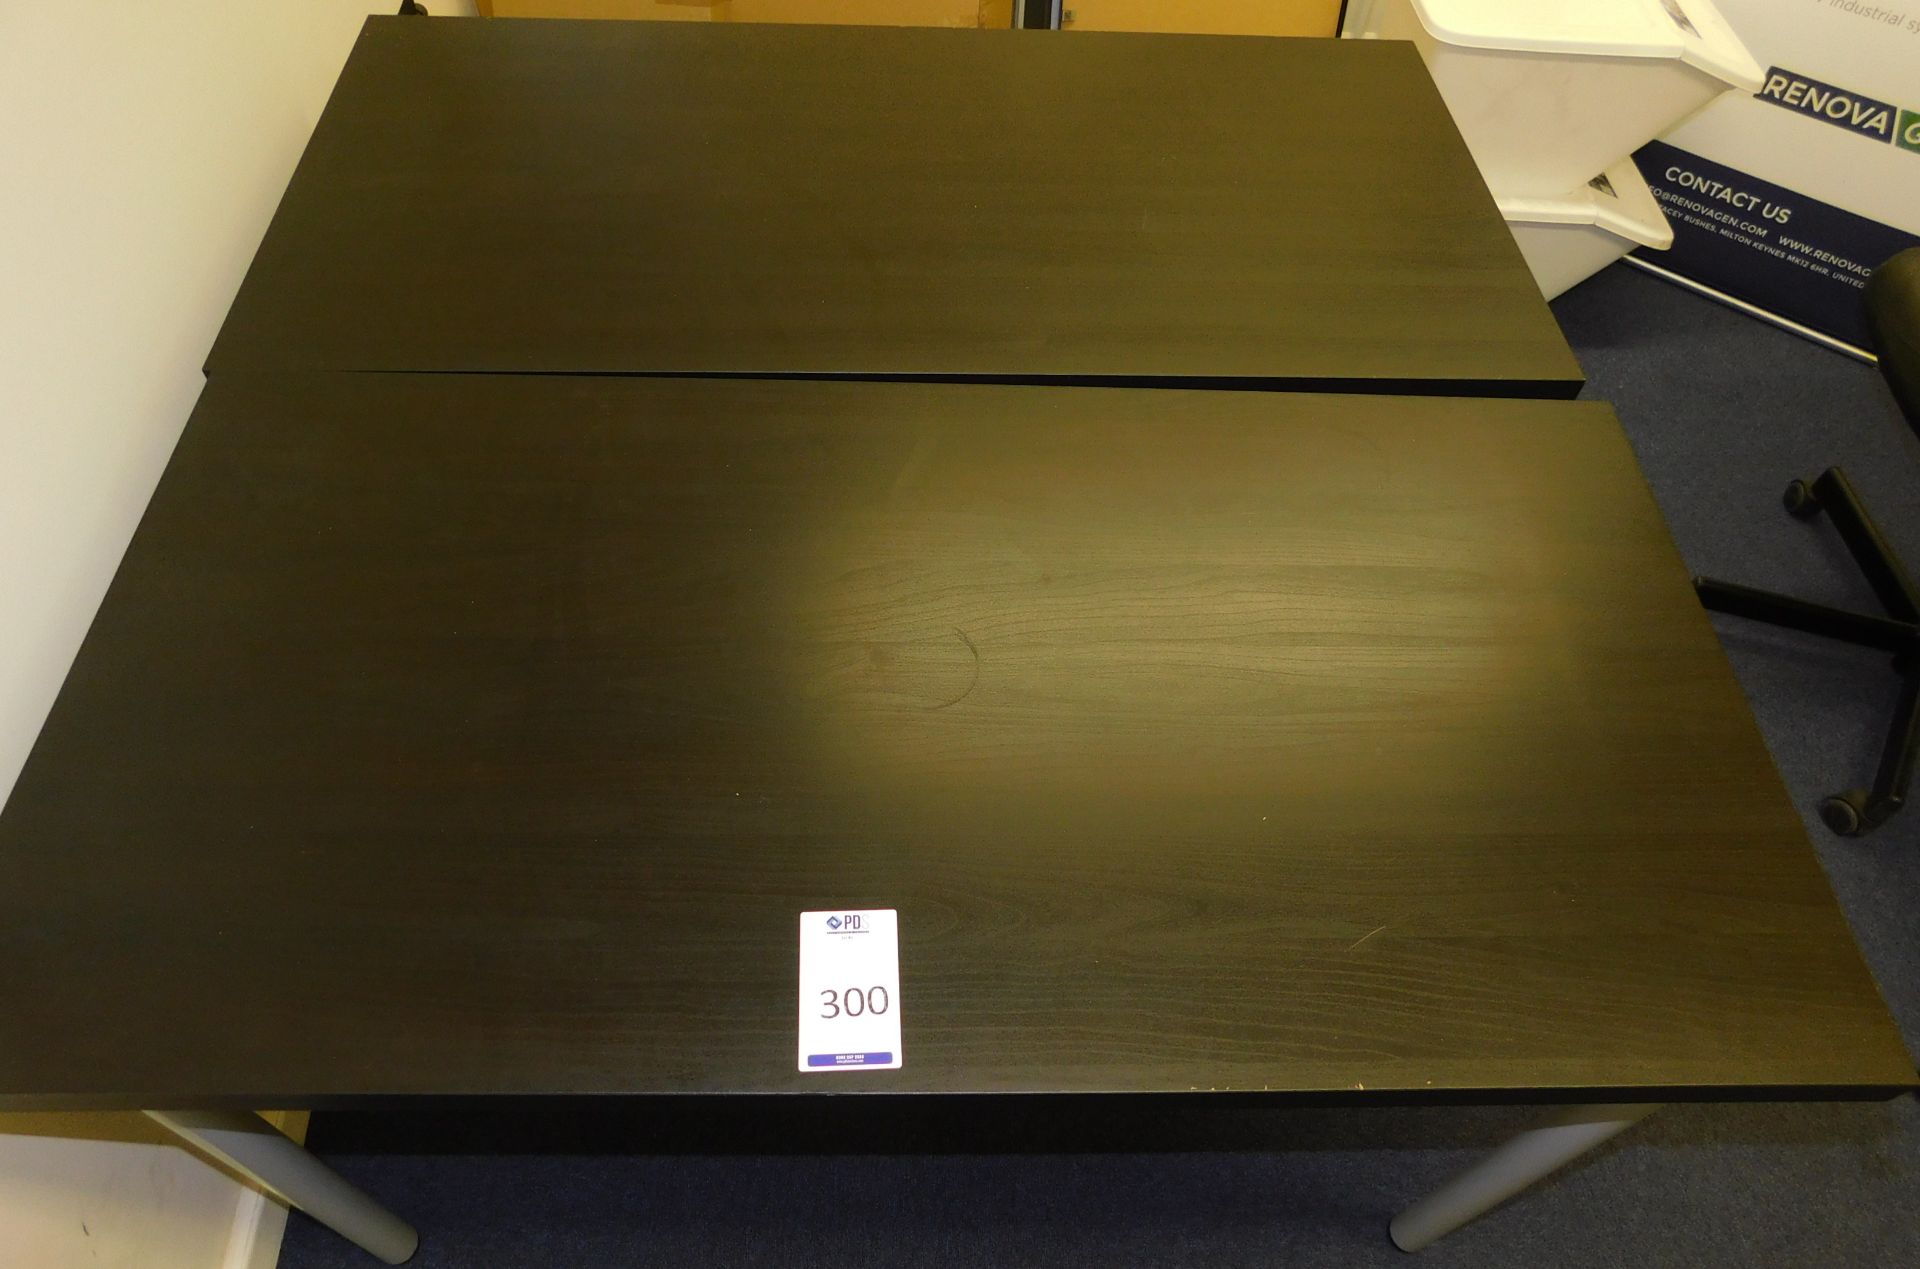 2 Desks, 2 Chairs, Projection Screen & TV Stand (Location: Milton Keynes - See General Notes for